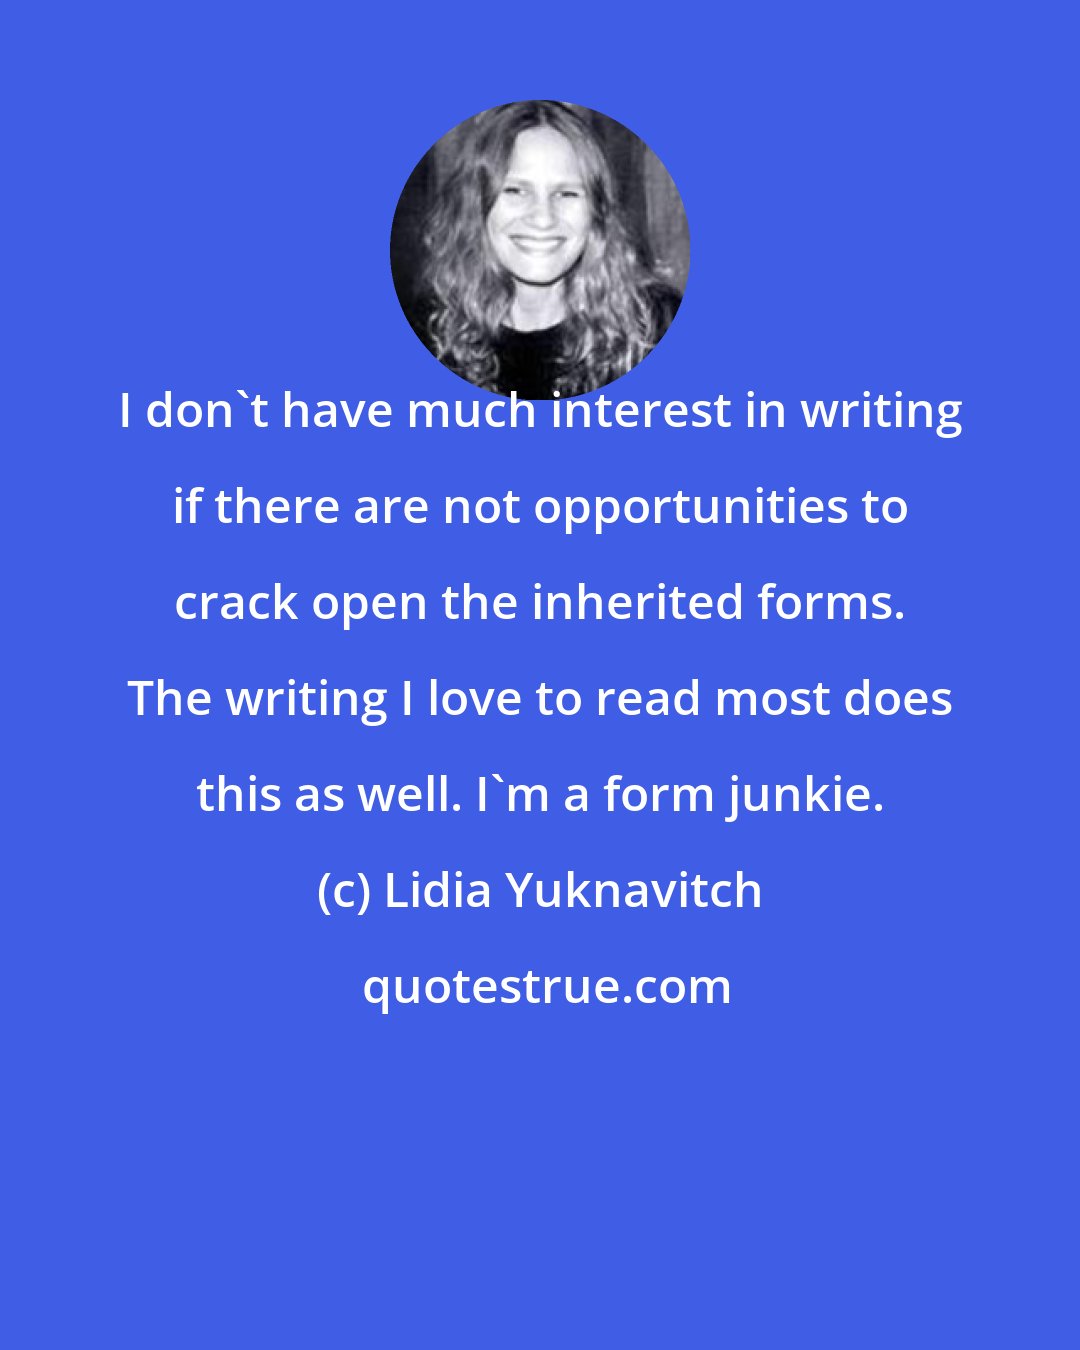 Lidia Yuknavitch: I don't have much interest in writing if there are not opportunities to crack open the inherited forms. The writing I love to read most does this as well. I'm a form junkie.